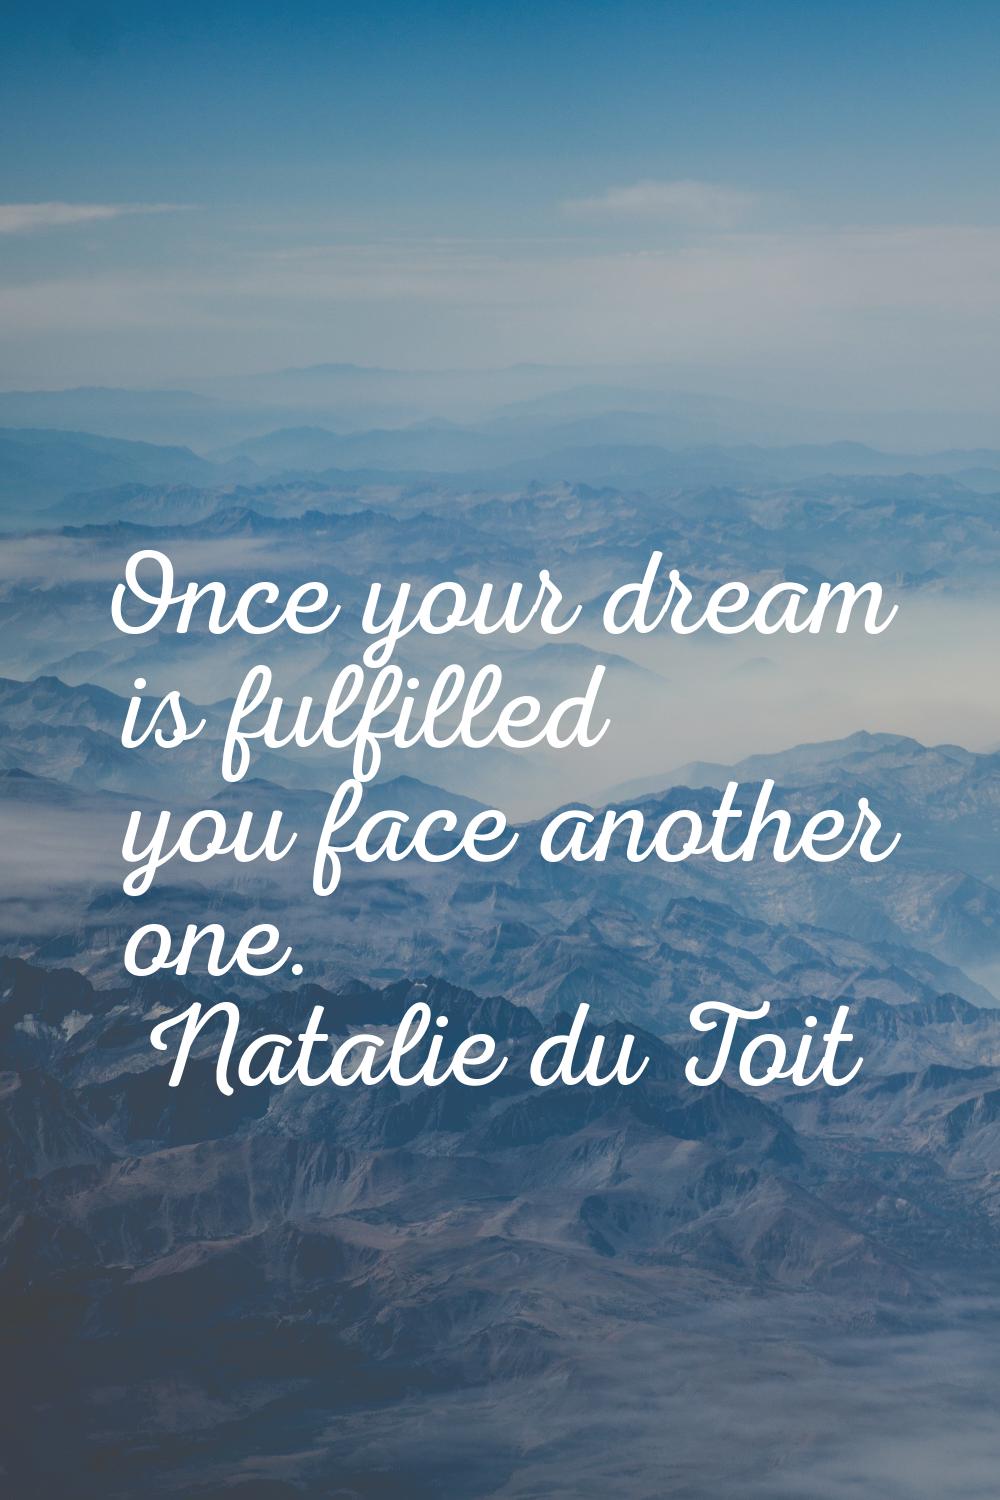 Once your dream is fulfilled you face another one.